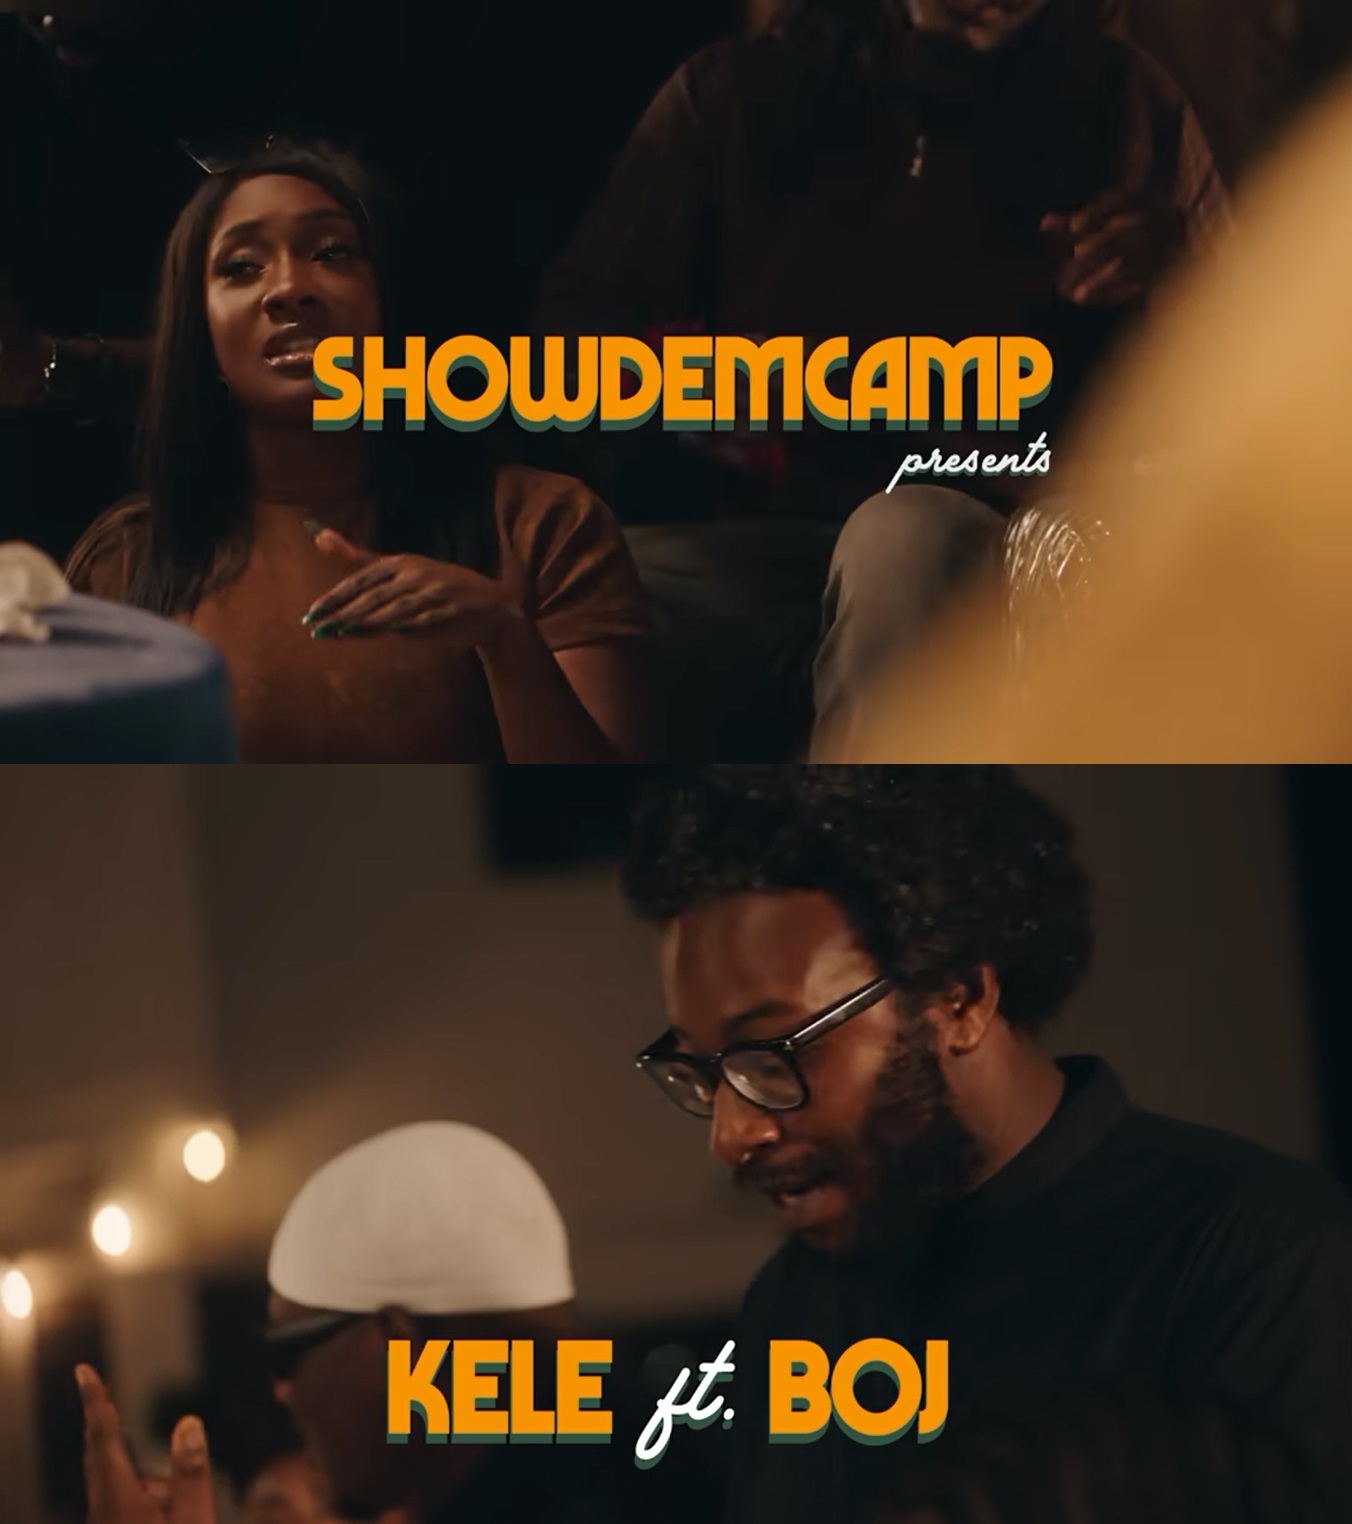 Show Dem Camp Unveils &Quot;Kele&Quot; Music Video Featuring Boj From Palmwine Music 3 Series, Yours Truly, News, March 1, 2024